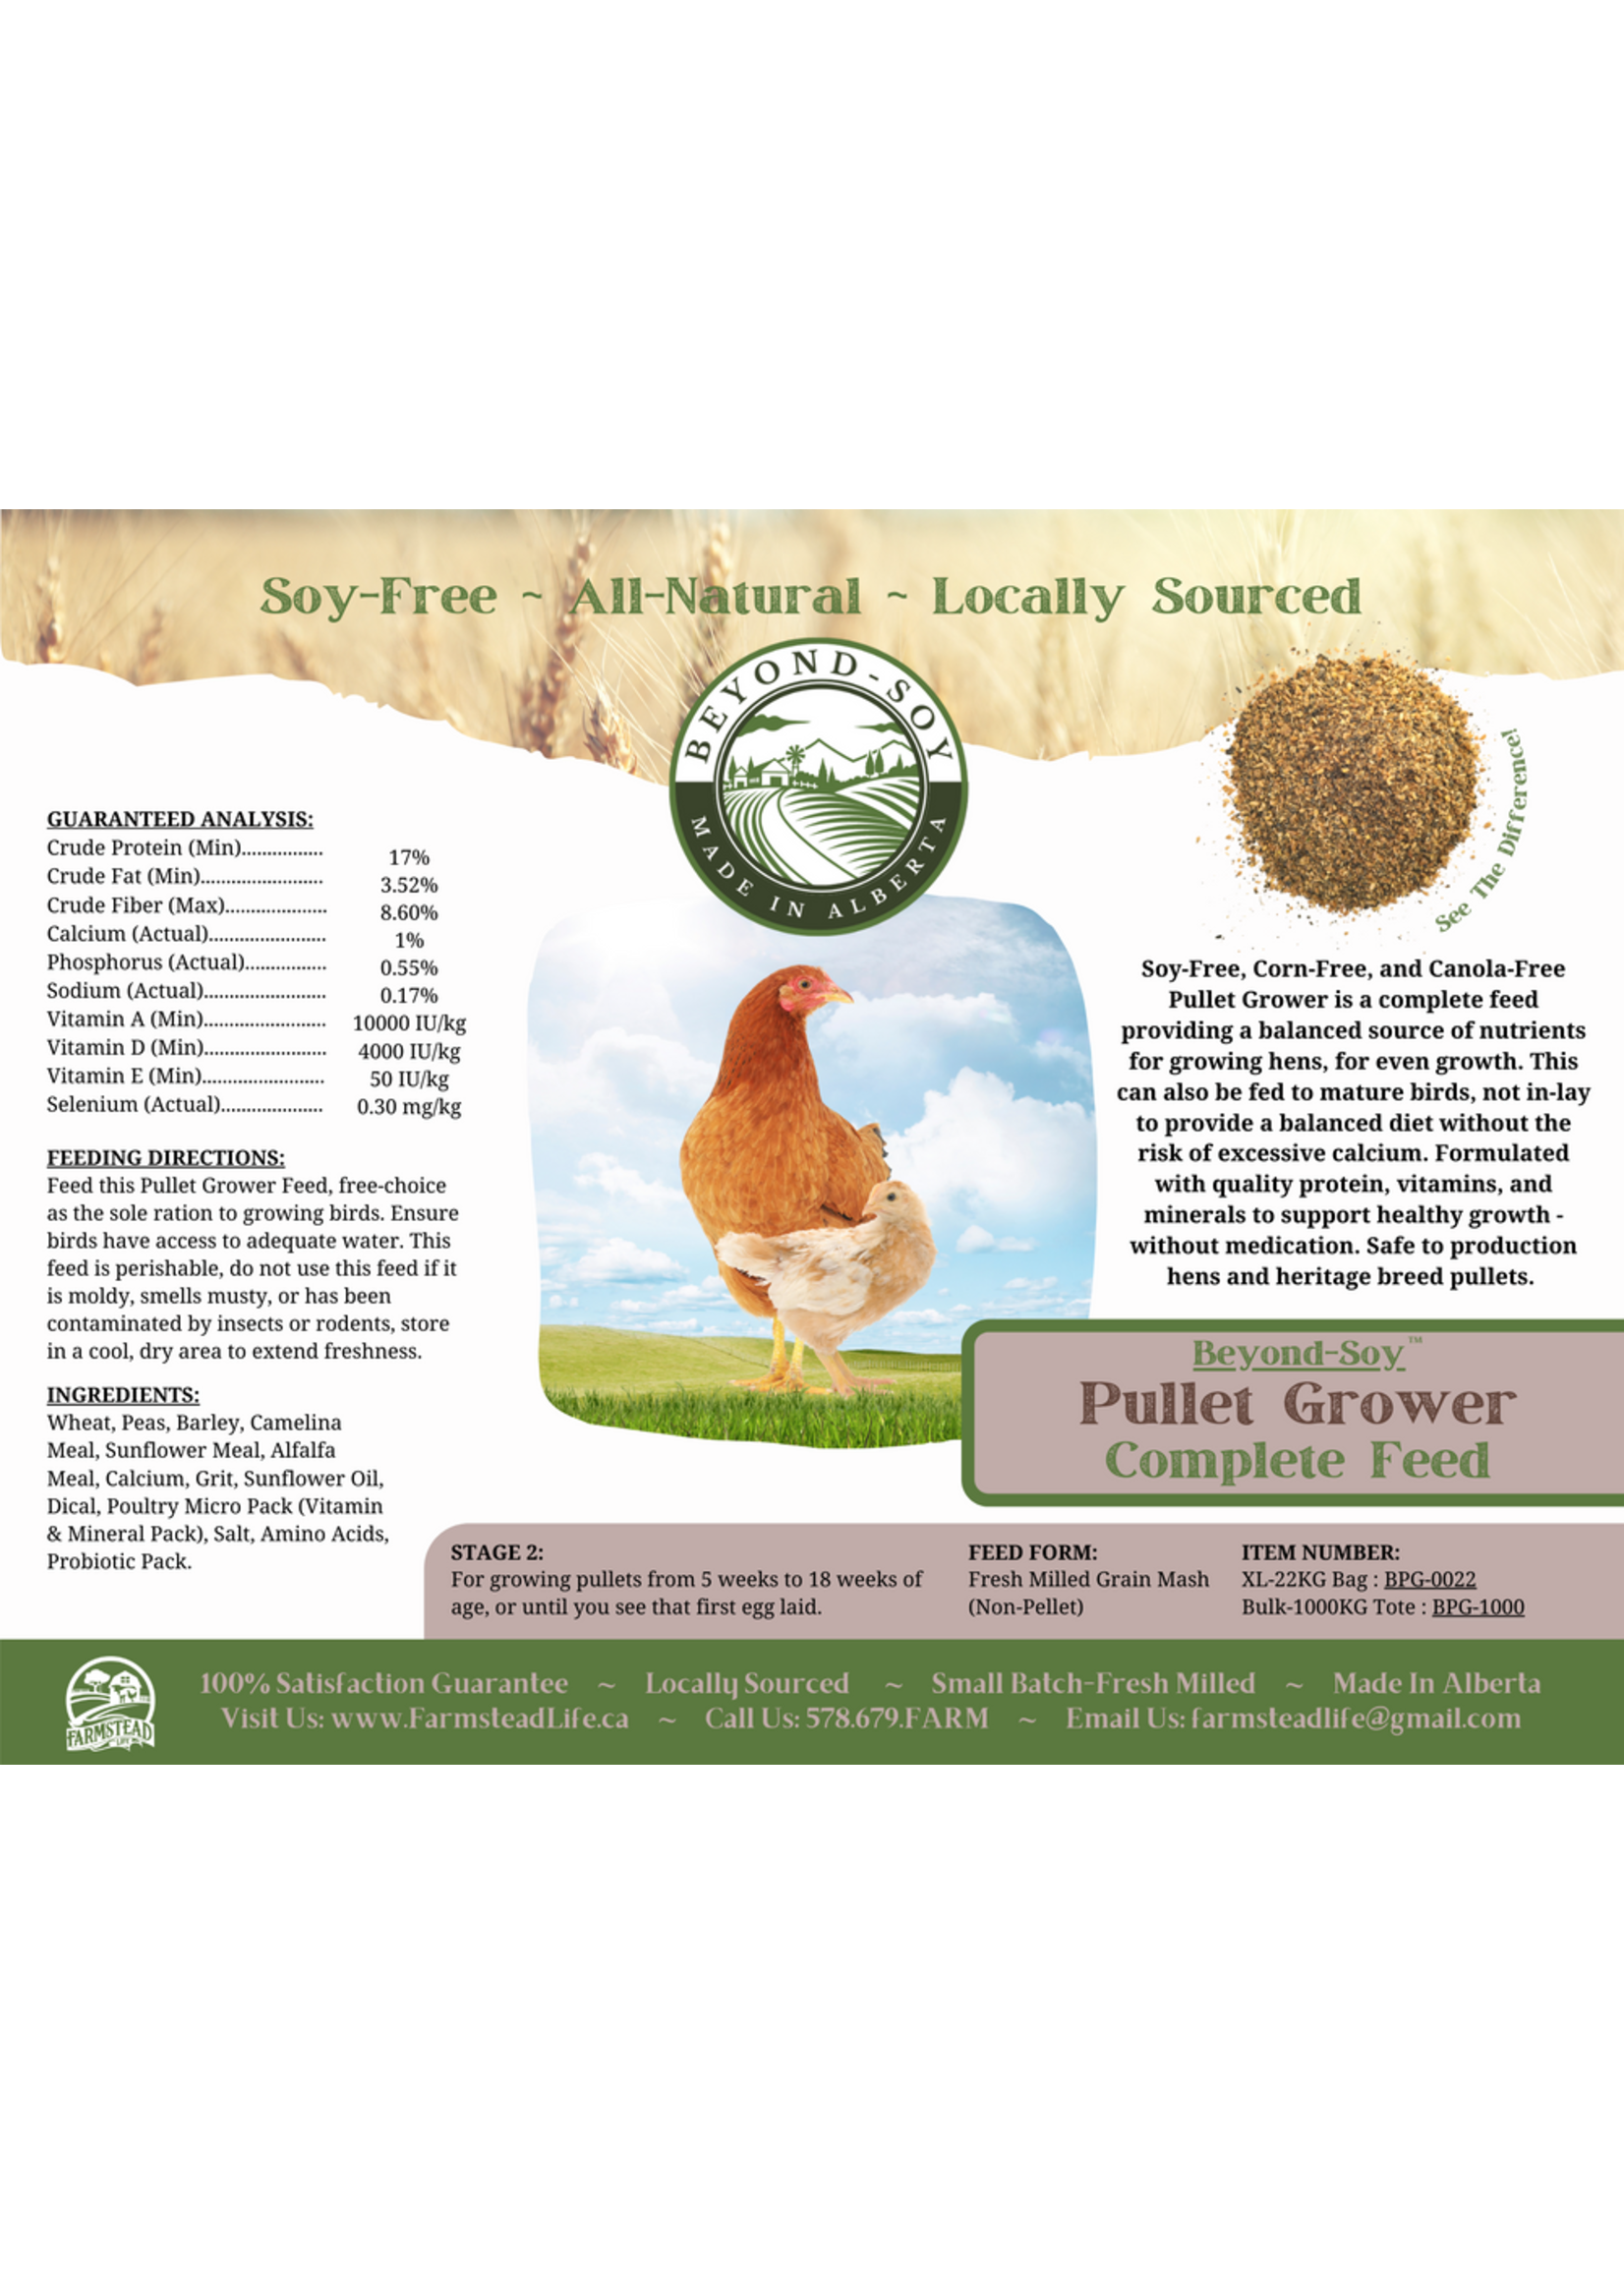 FSL - SOY-FREE - Pullet Grower Complete Feed - 22 kg